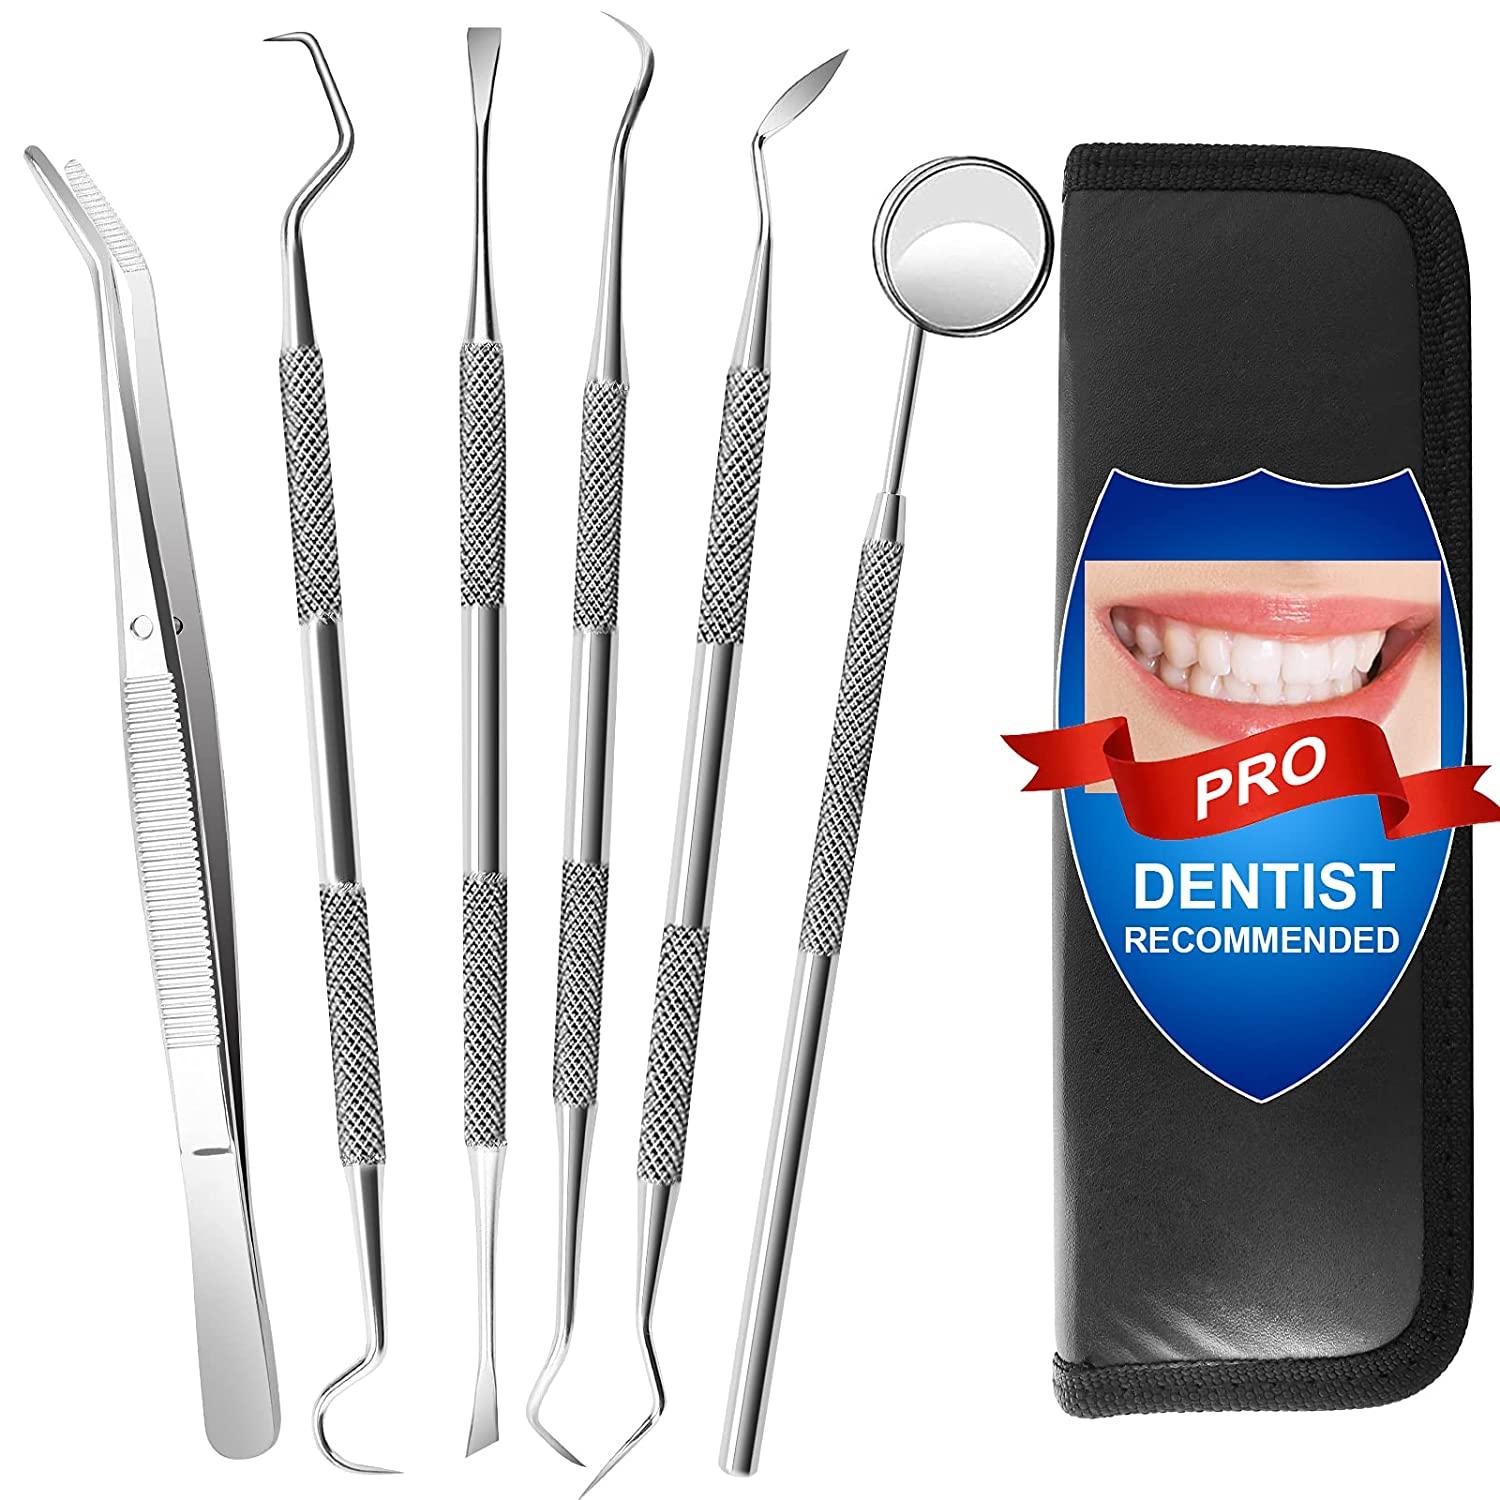 6 Pack Dental Tools, Professional Dentist Tool Hygiene Kit, Stainless Steel  Tooth Scraper Cleaning Plaque and Tartar Remover for Teeth, Dental Picks  Scaler Oral Care Tools Set (with Case) 6 Pack Dental